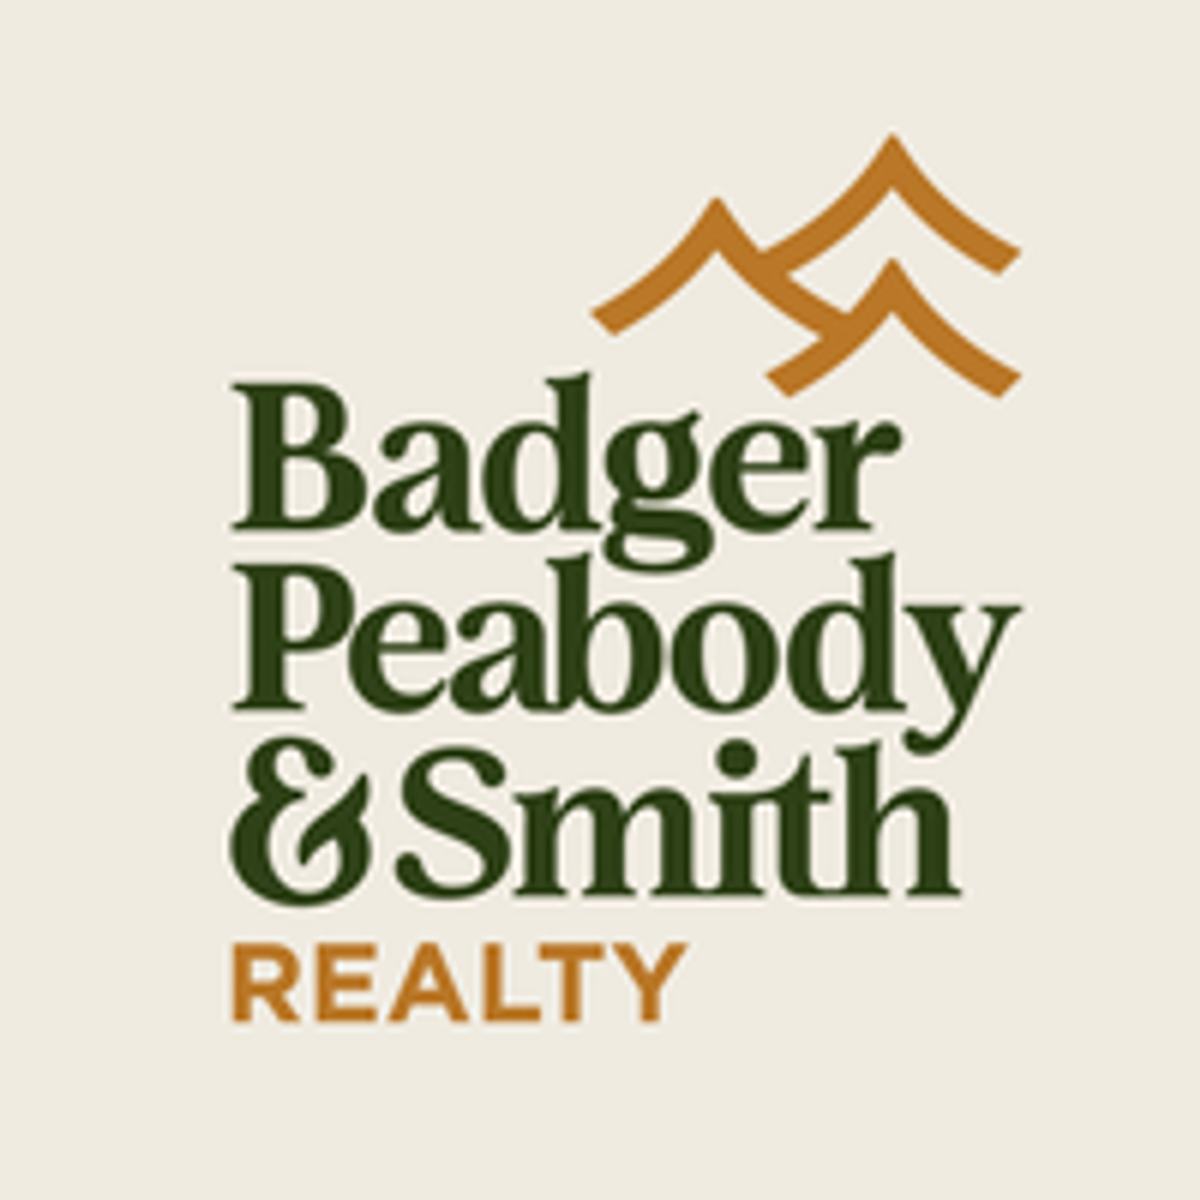 Photo for Raymond Newton, Listing Agent at Badger Peabody & Smith Realty/Holderness